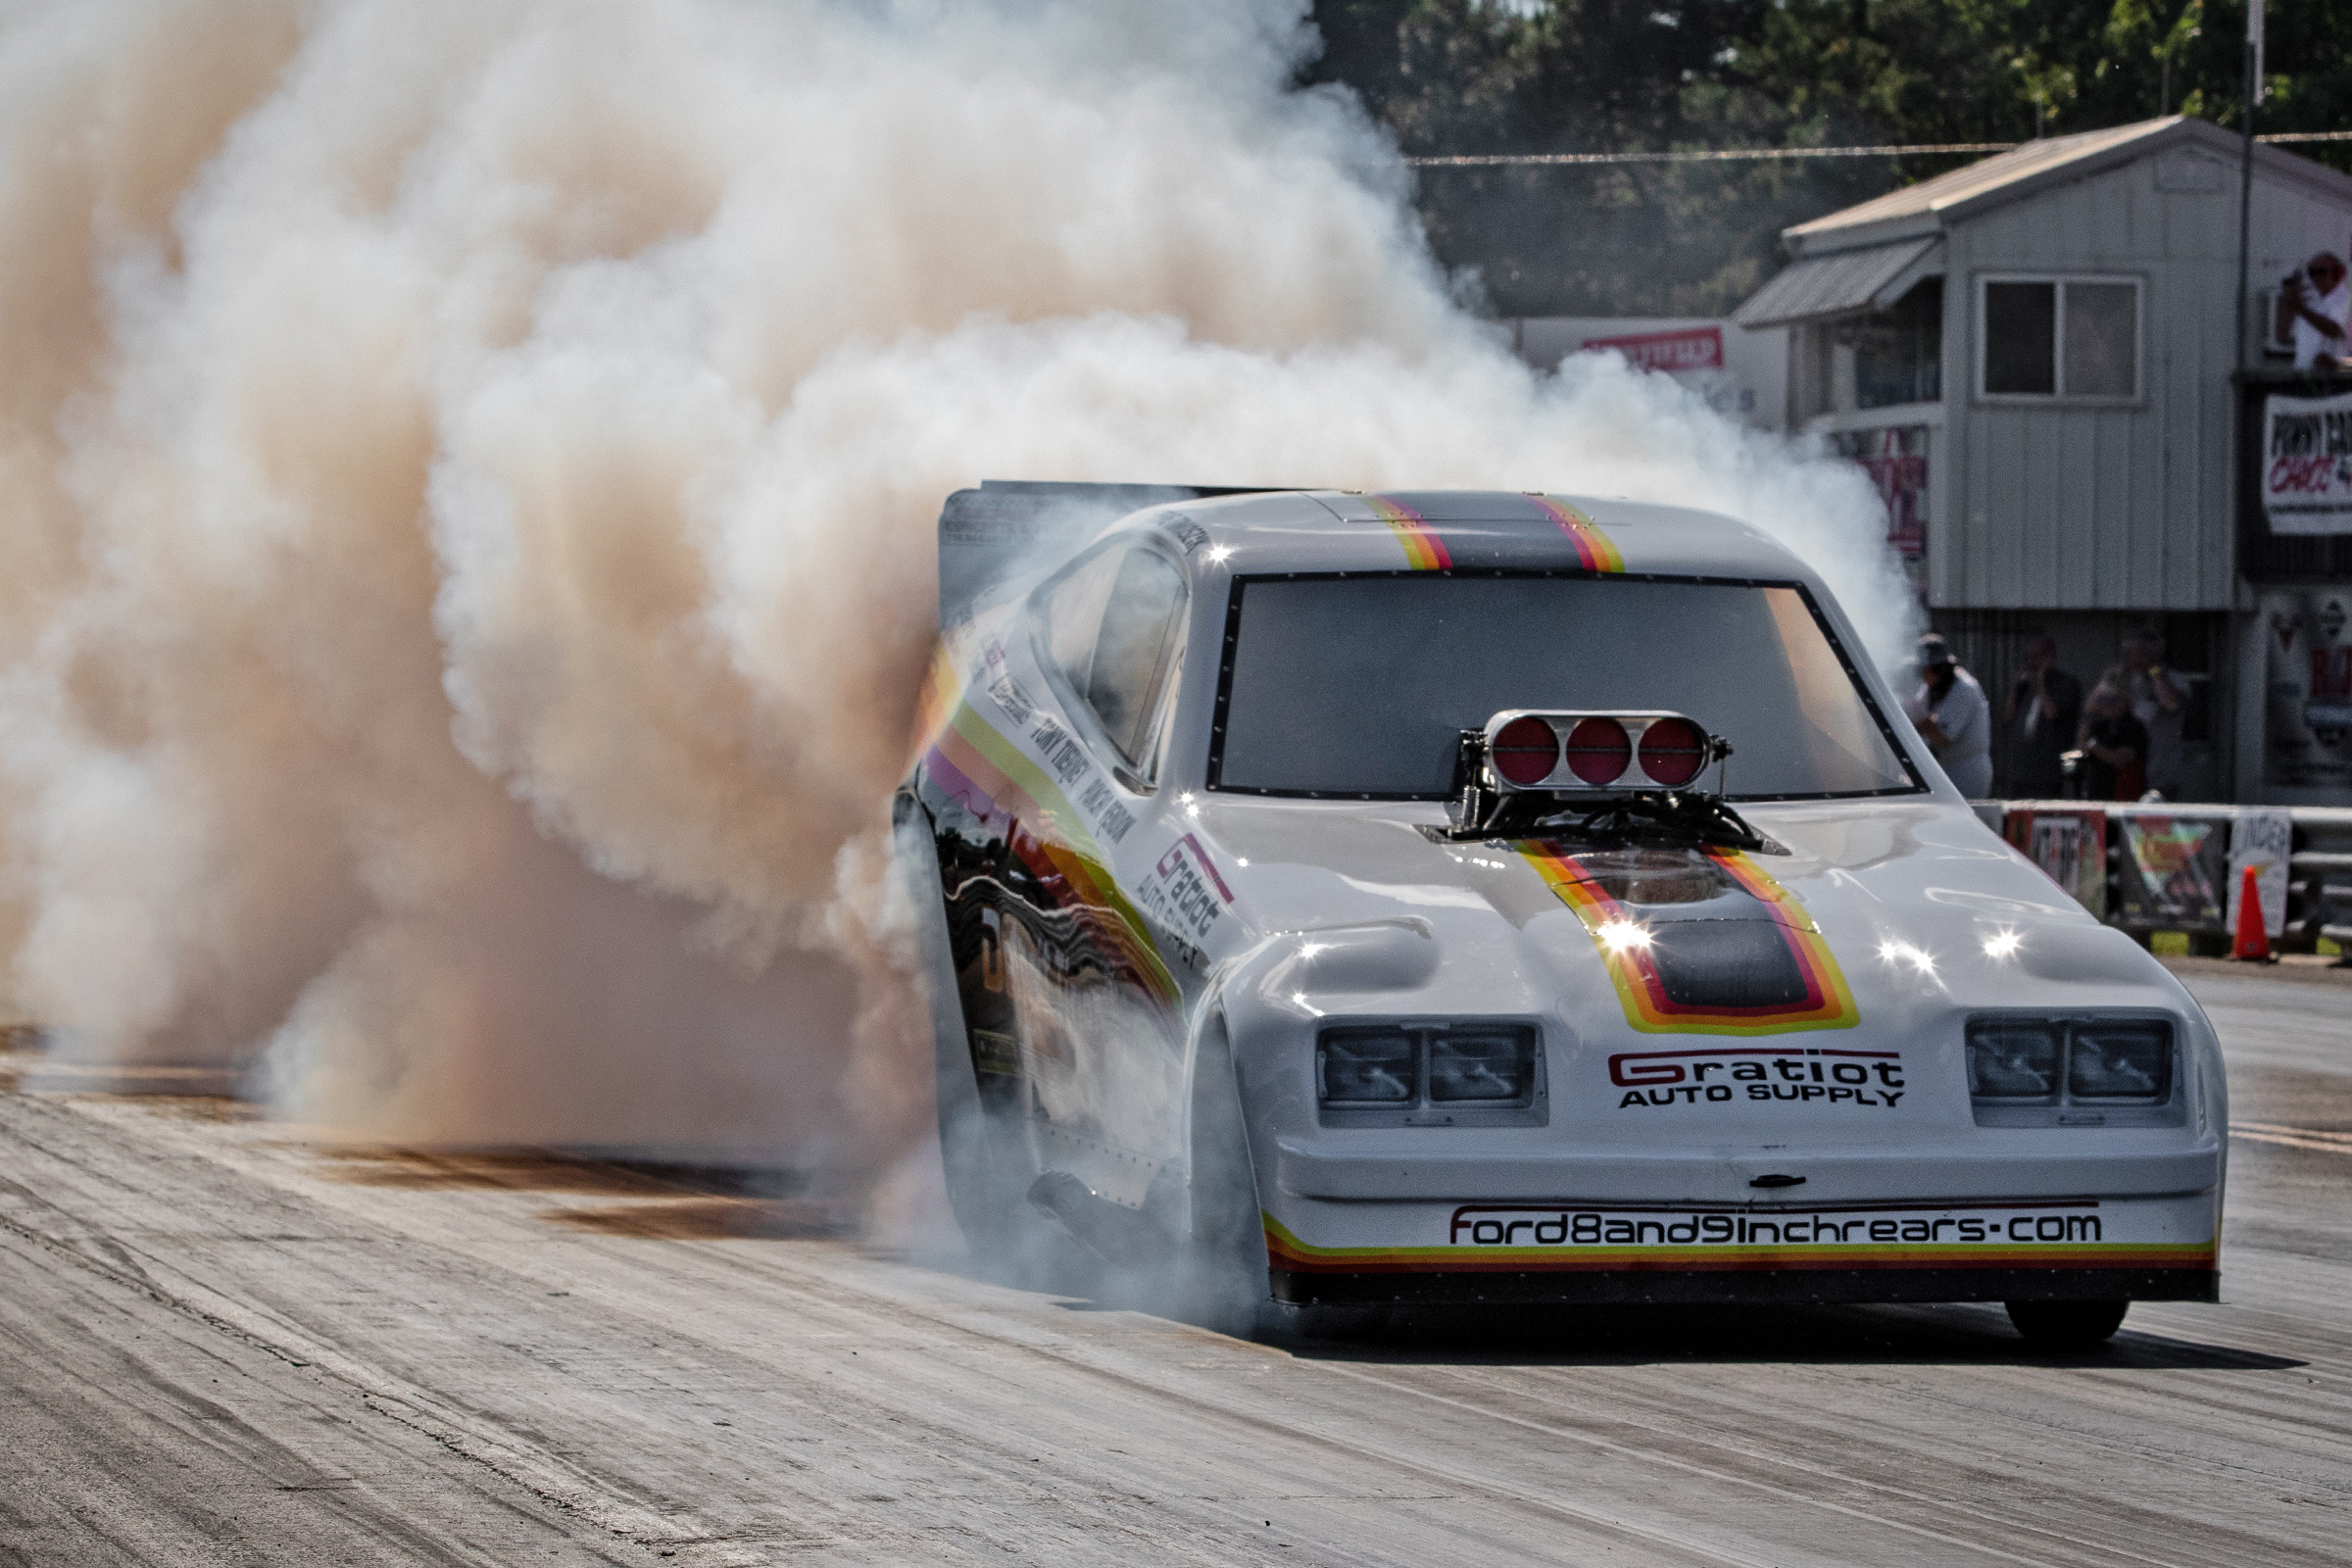 Funny Car Chaos Releases 2022 Championship Tour Schedule - Drag Illustrated  | Drag Racing News, Opinion, Interviews, Photos, Videos and More